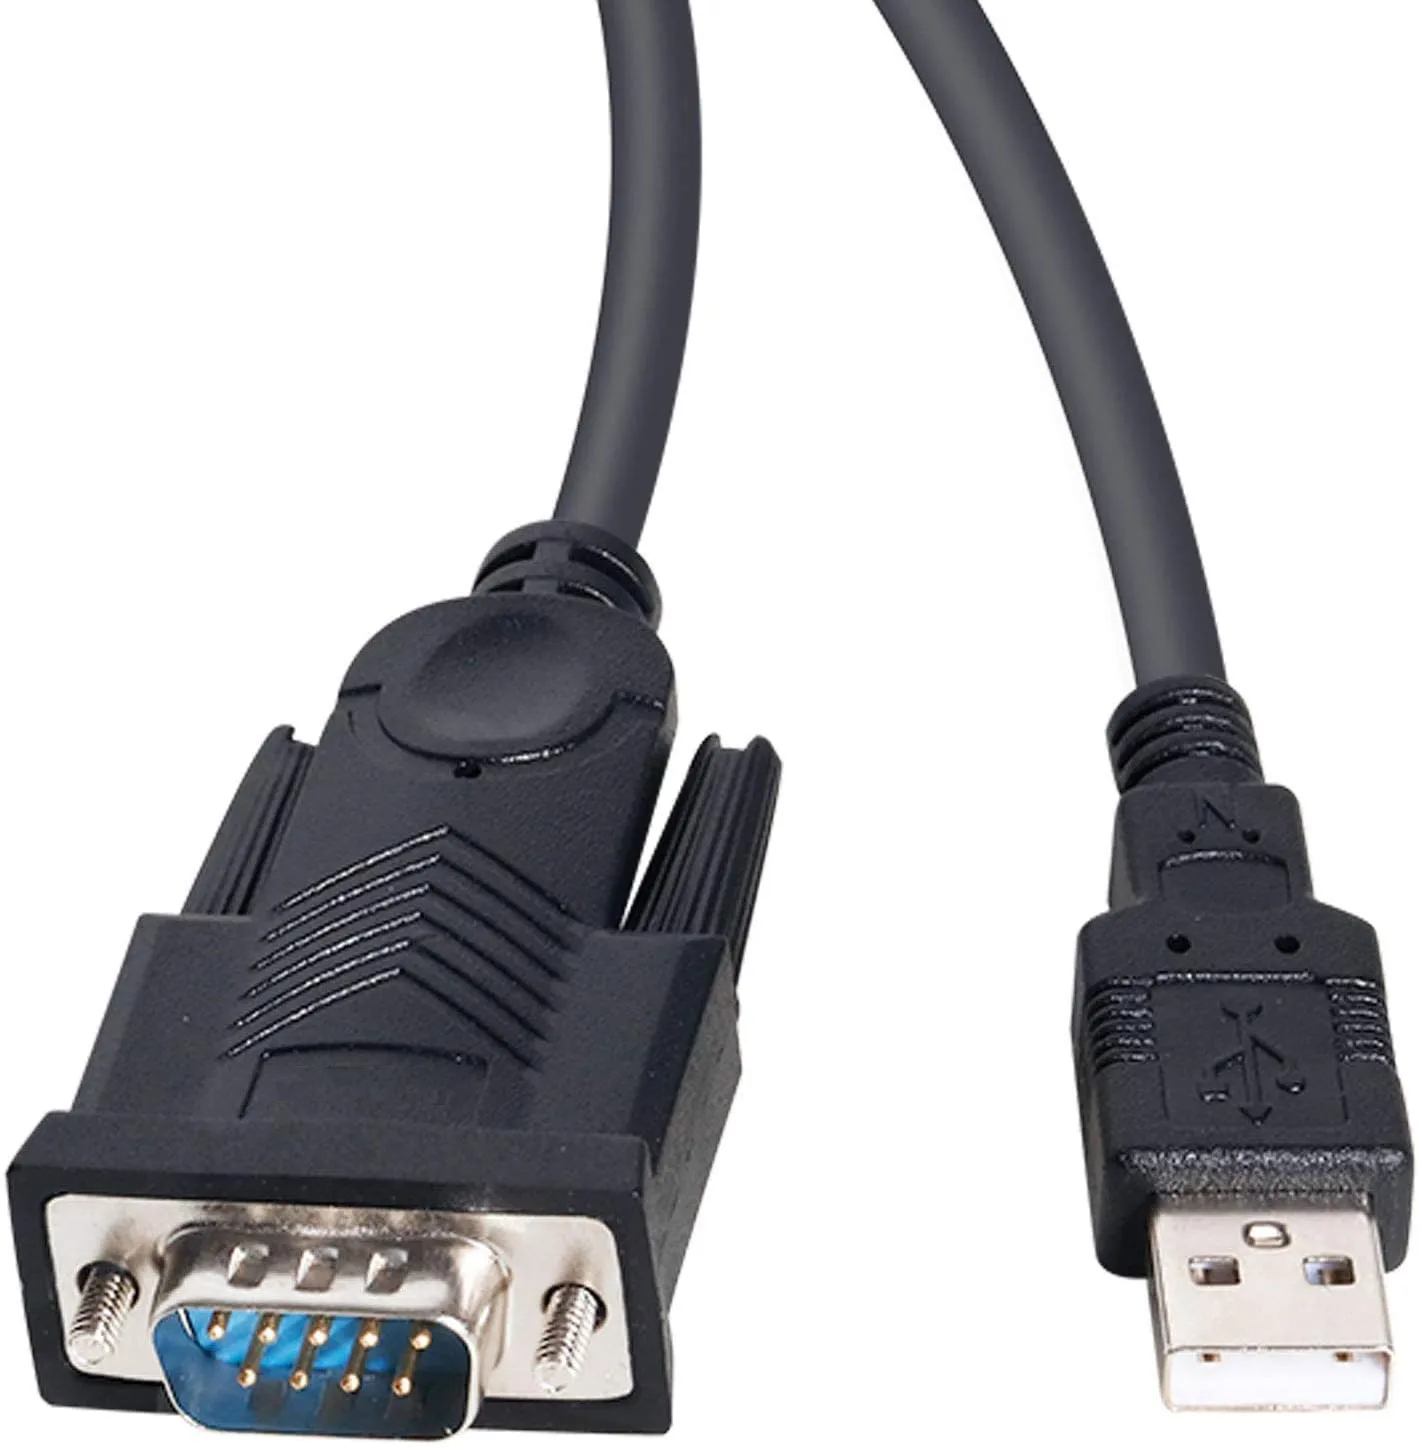 

USB 2.0 to Serial (9-Pin) DB-9 RS-232 Adapter Cable 6ft Cable